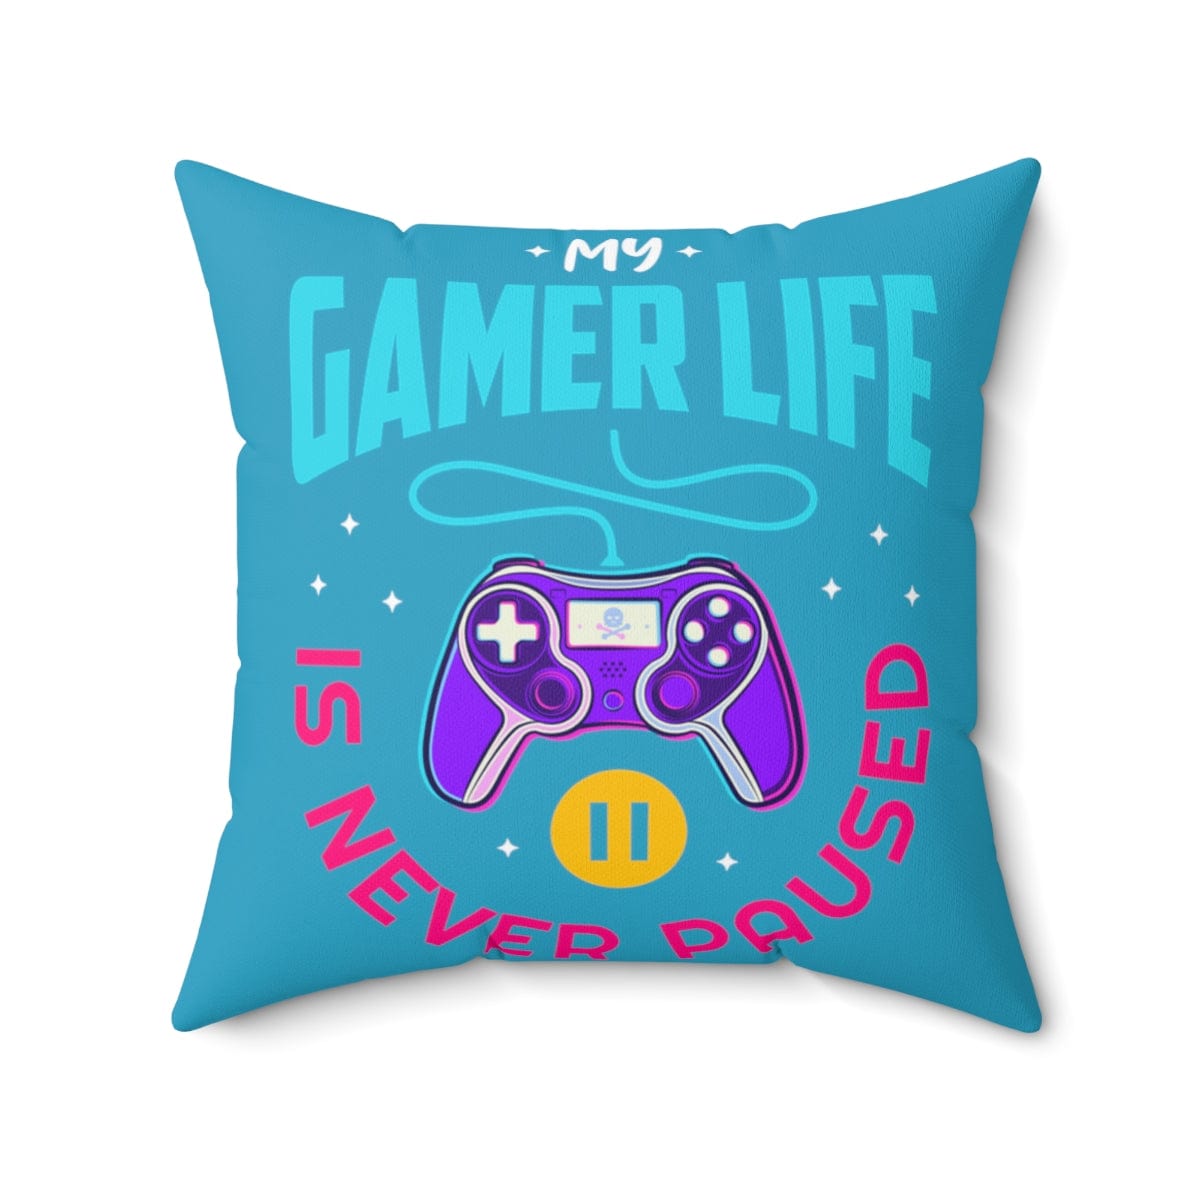 My Gamer Life Never Pauses | Spun Square Turquoise | Bed/Couch Pillow